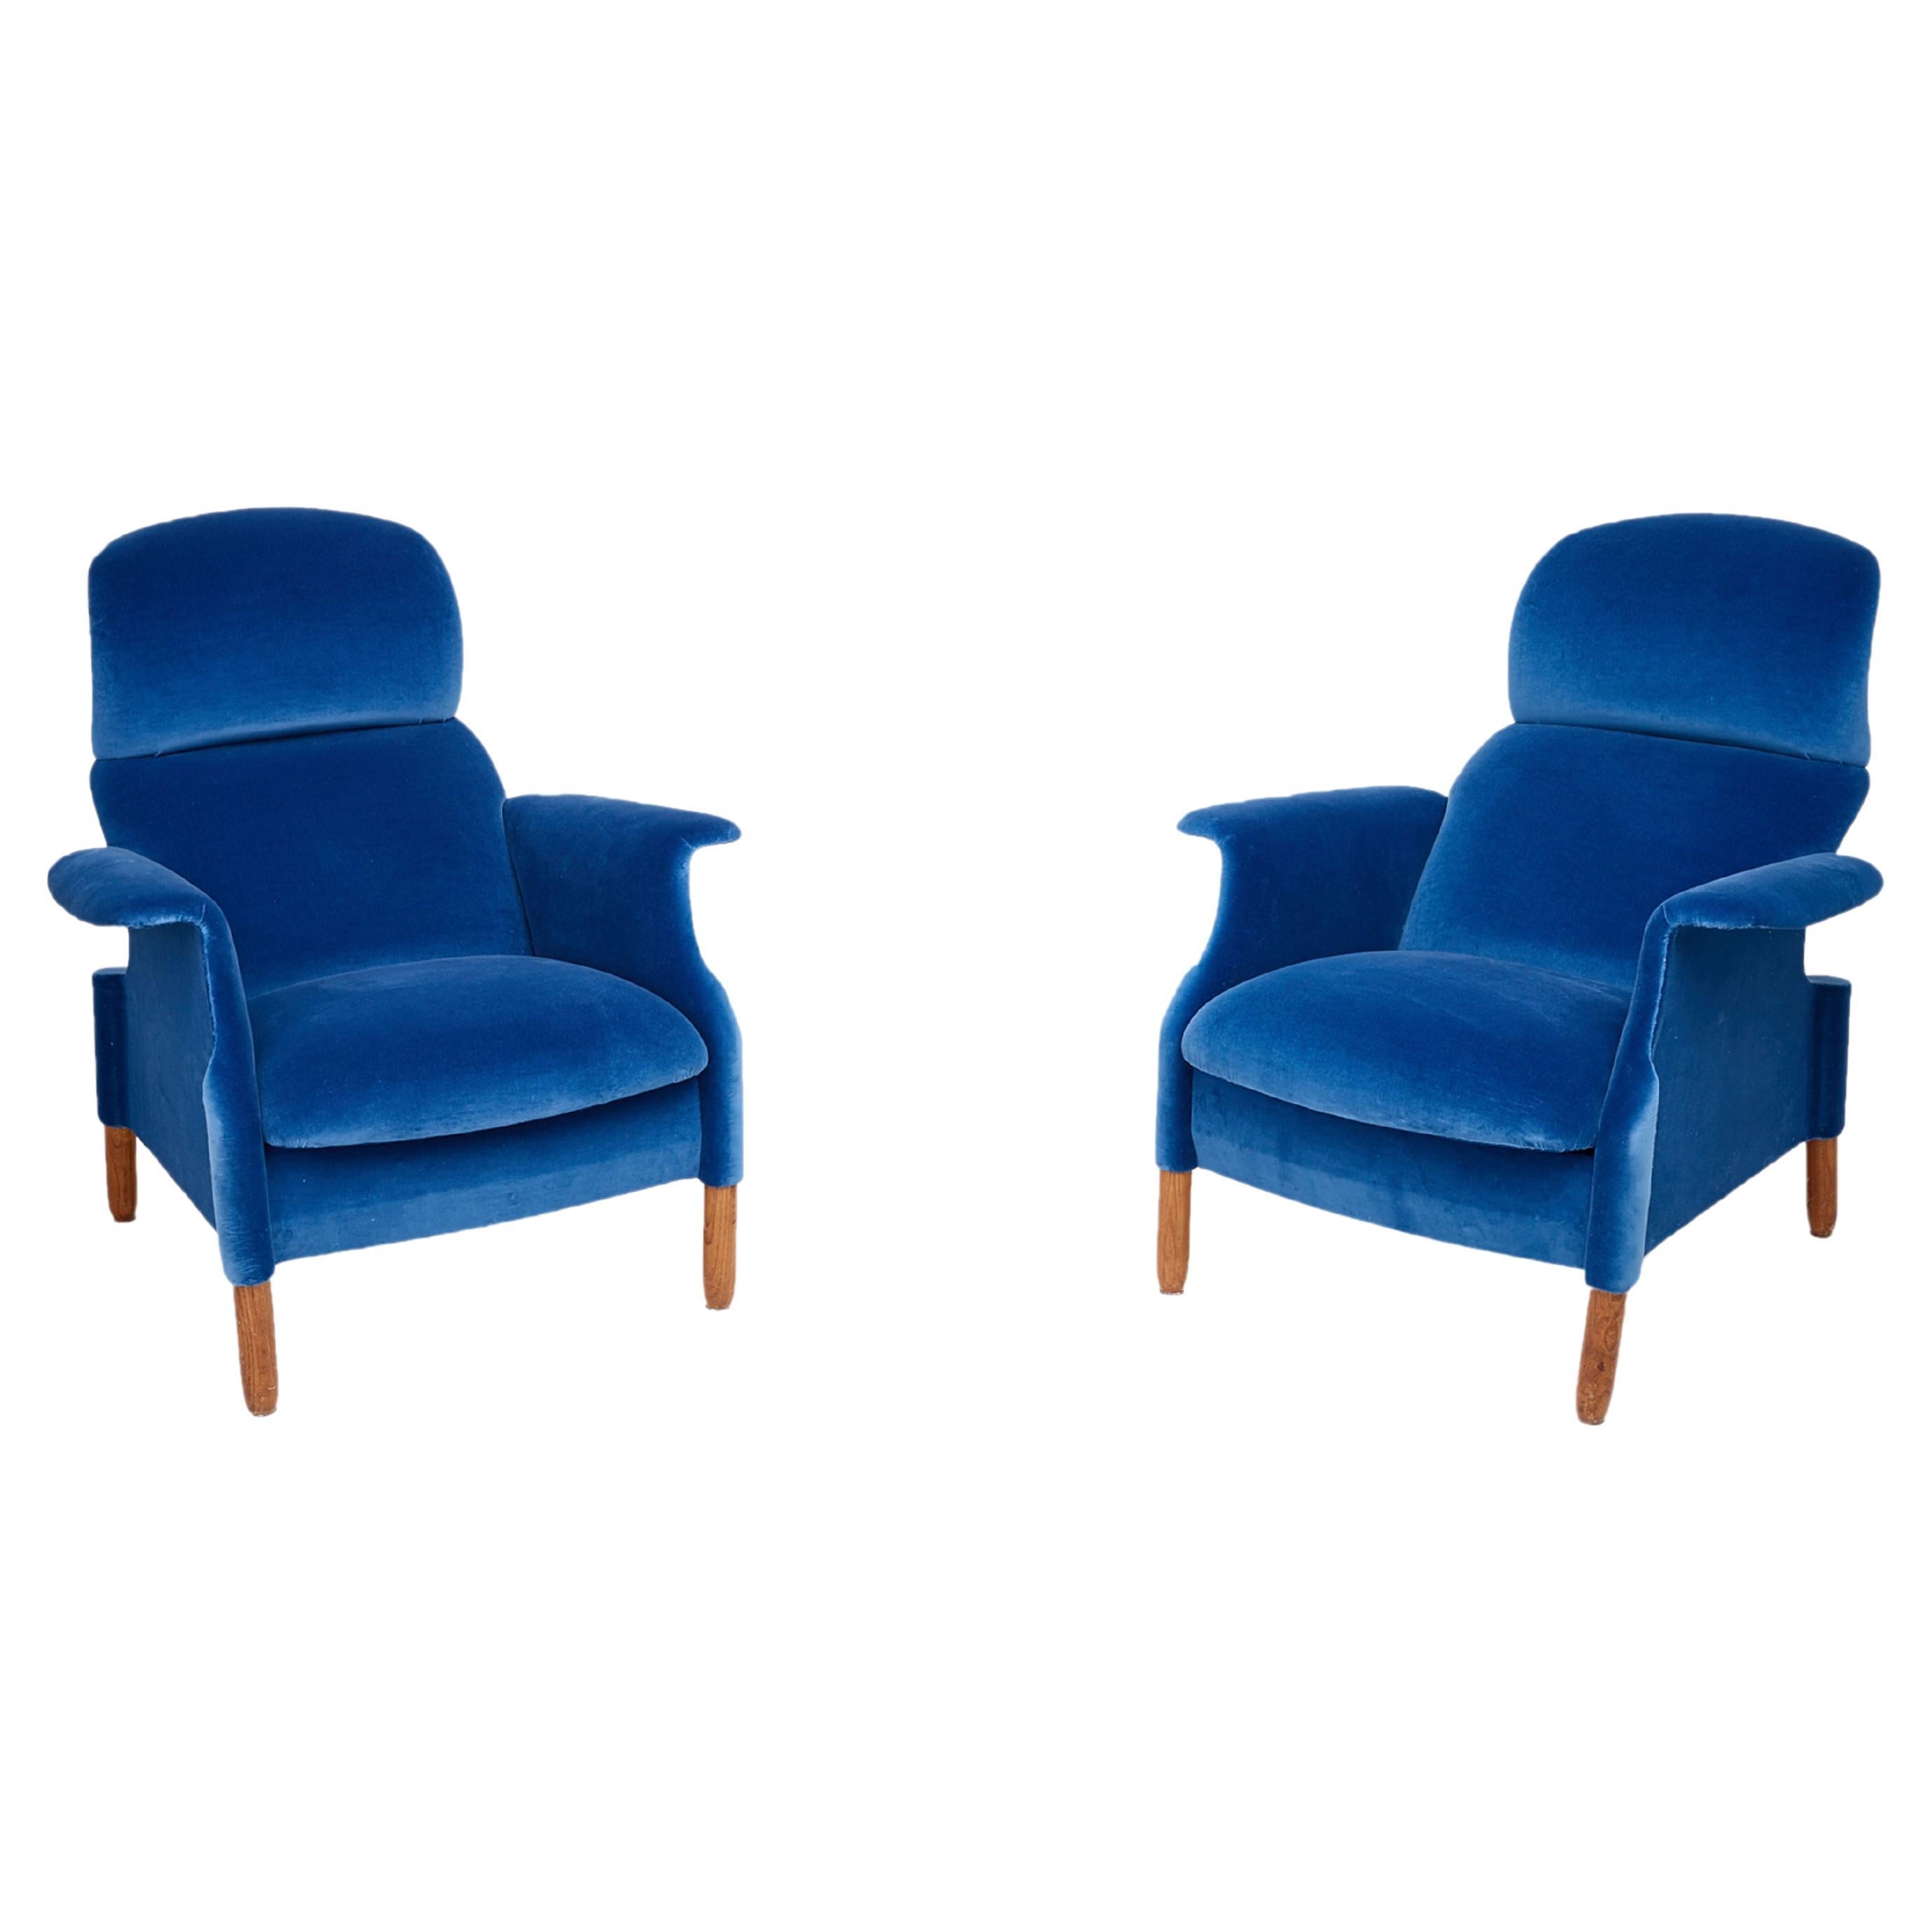 Pair of Sanluca Armchairs by Achille and Pier Giacomo Castiglioni in Blue Velvet